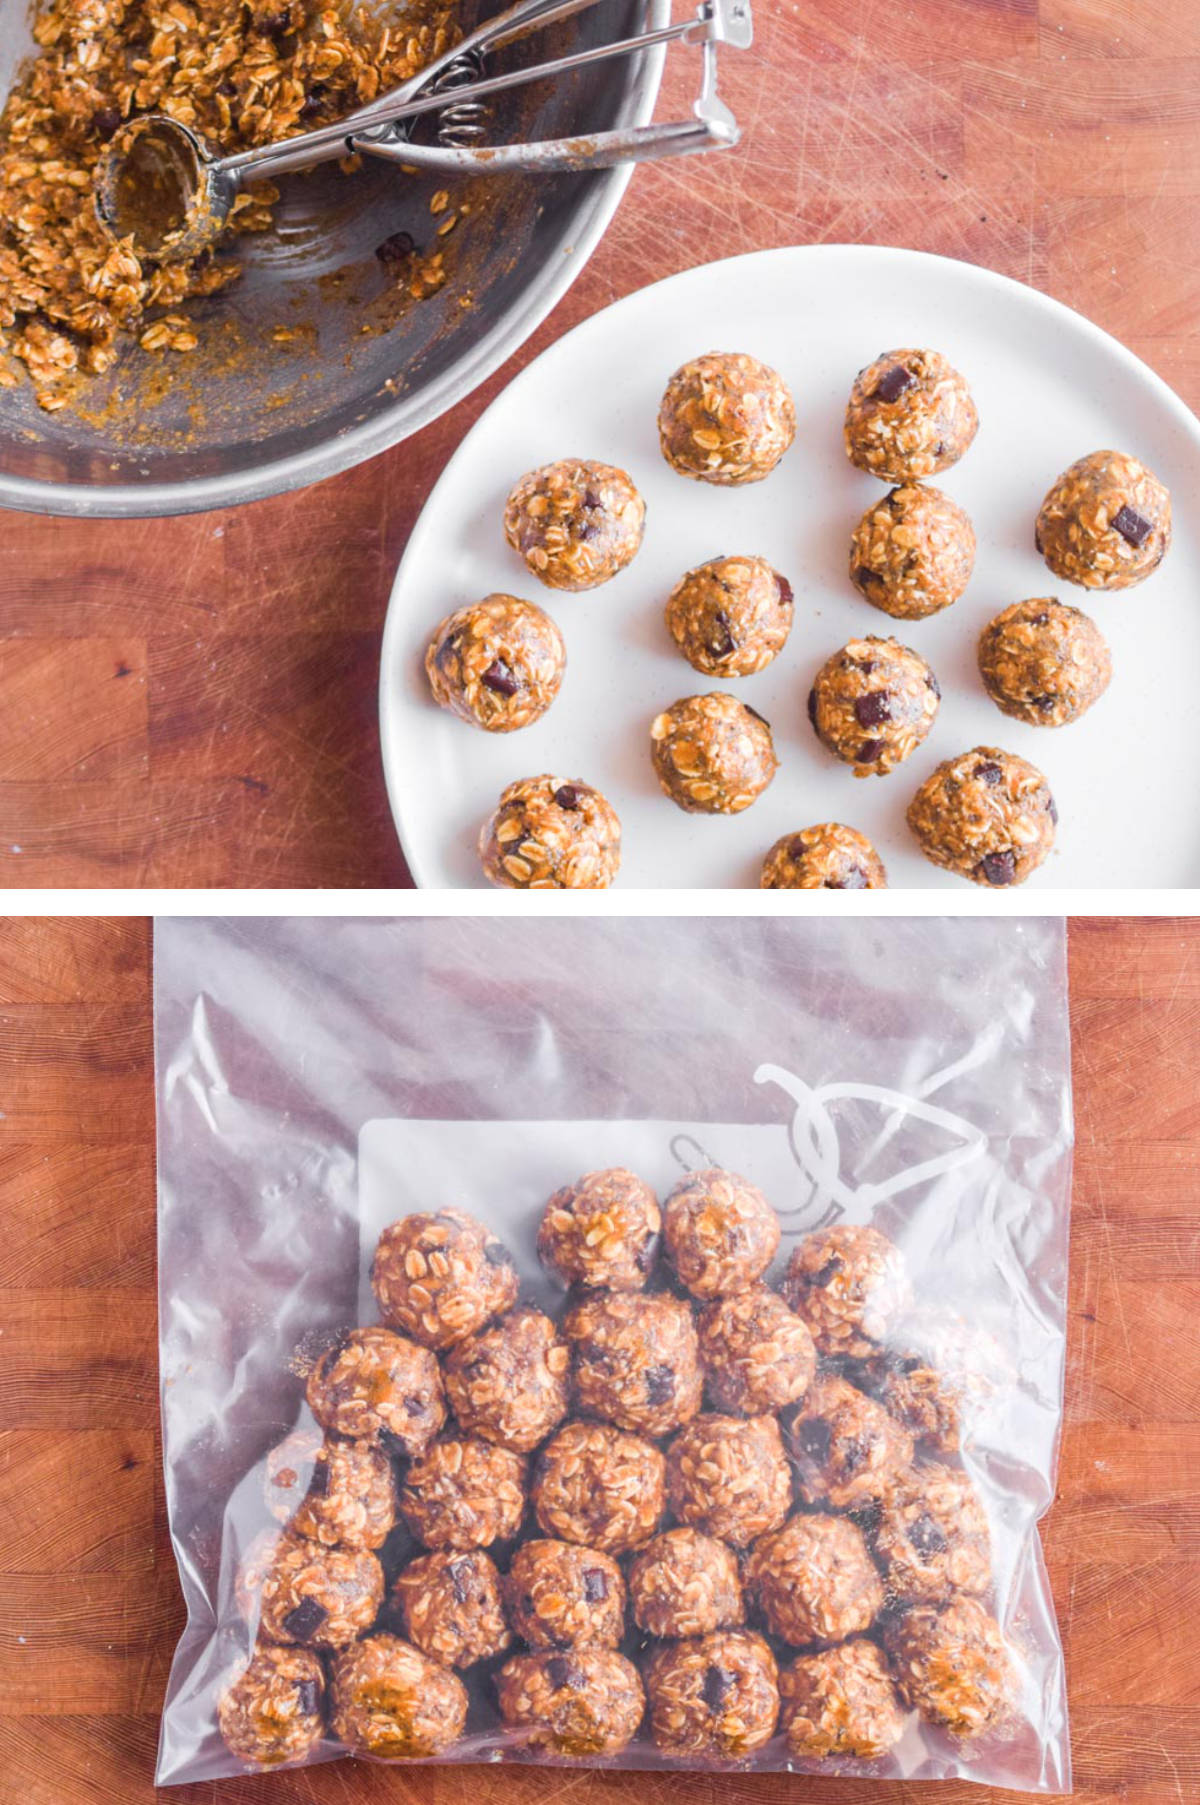 Two overhead images in one: 1. A cookie scoop is used to make the batter into balls which are placed on a white plate. 2. Finished pumpkin oat energy balls are placed side-by-side in a Ziploc bag. 